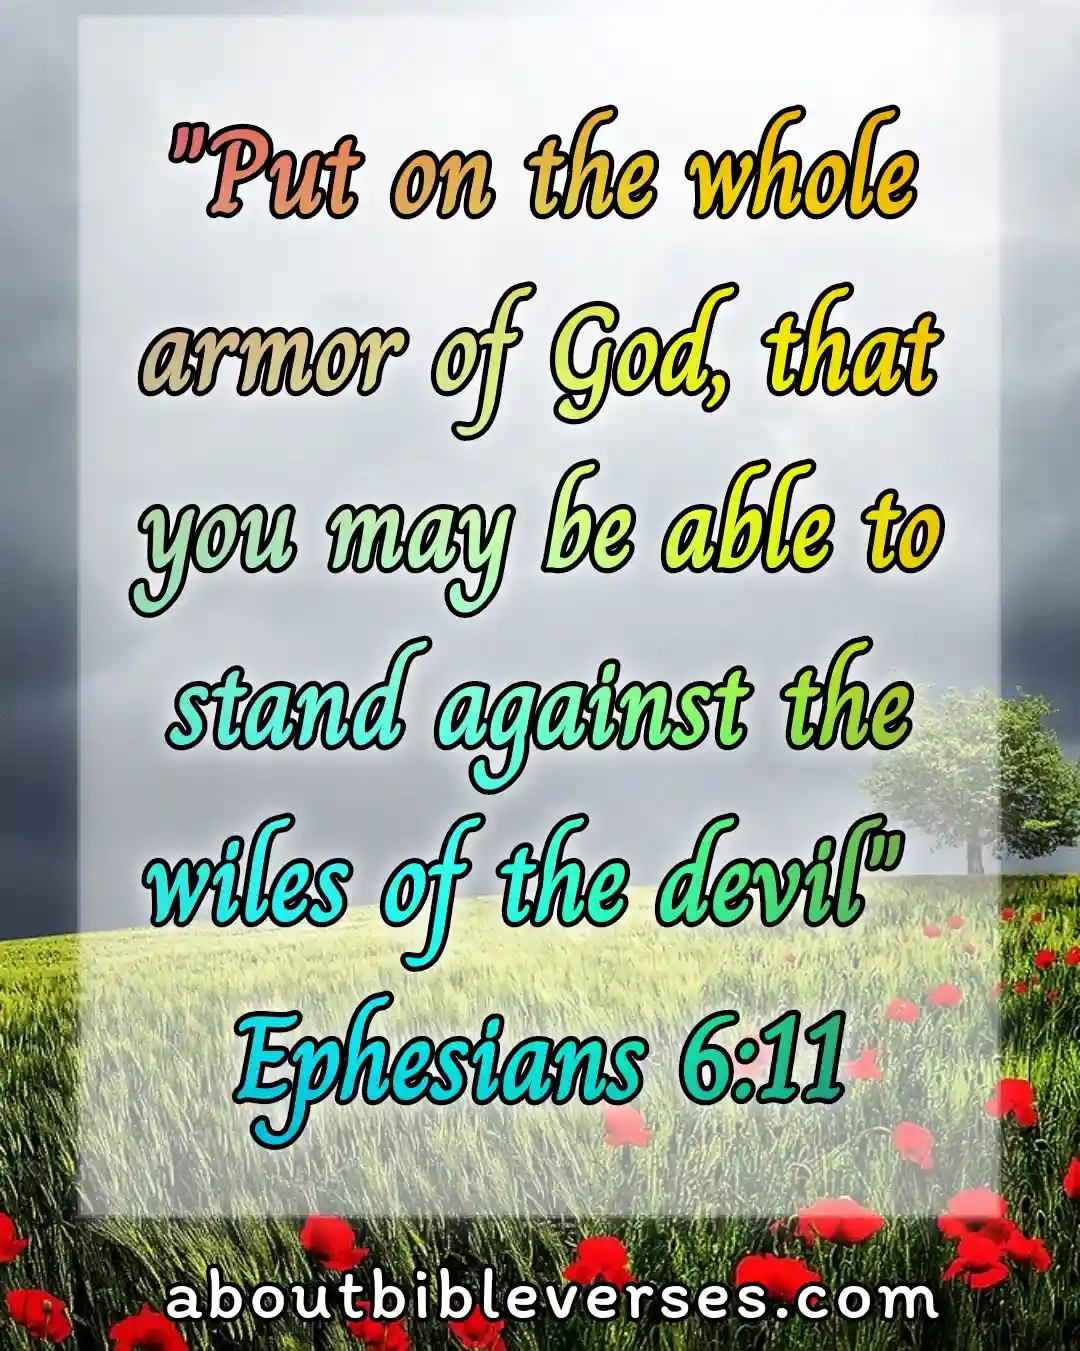 Bible Verses About God's Army (Ephesians 6:11)